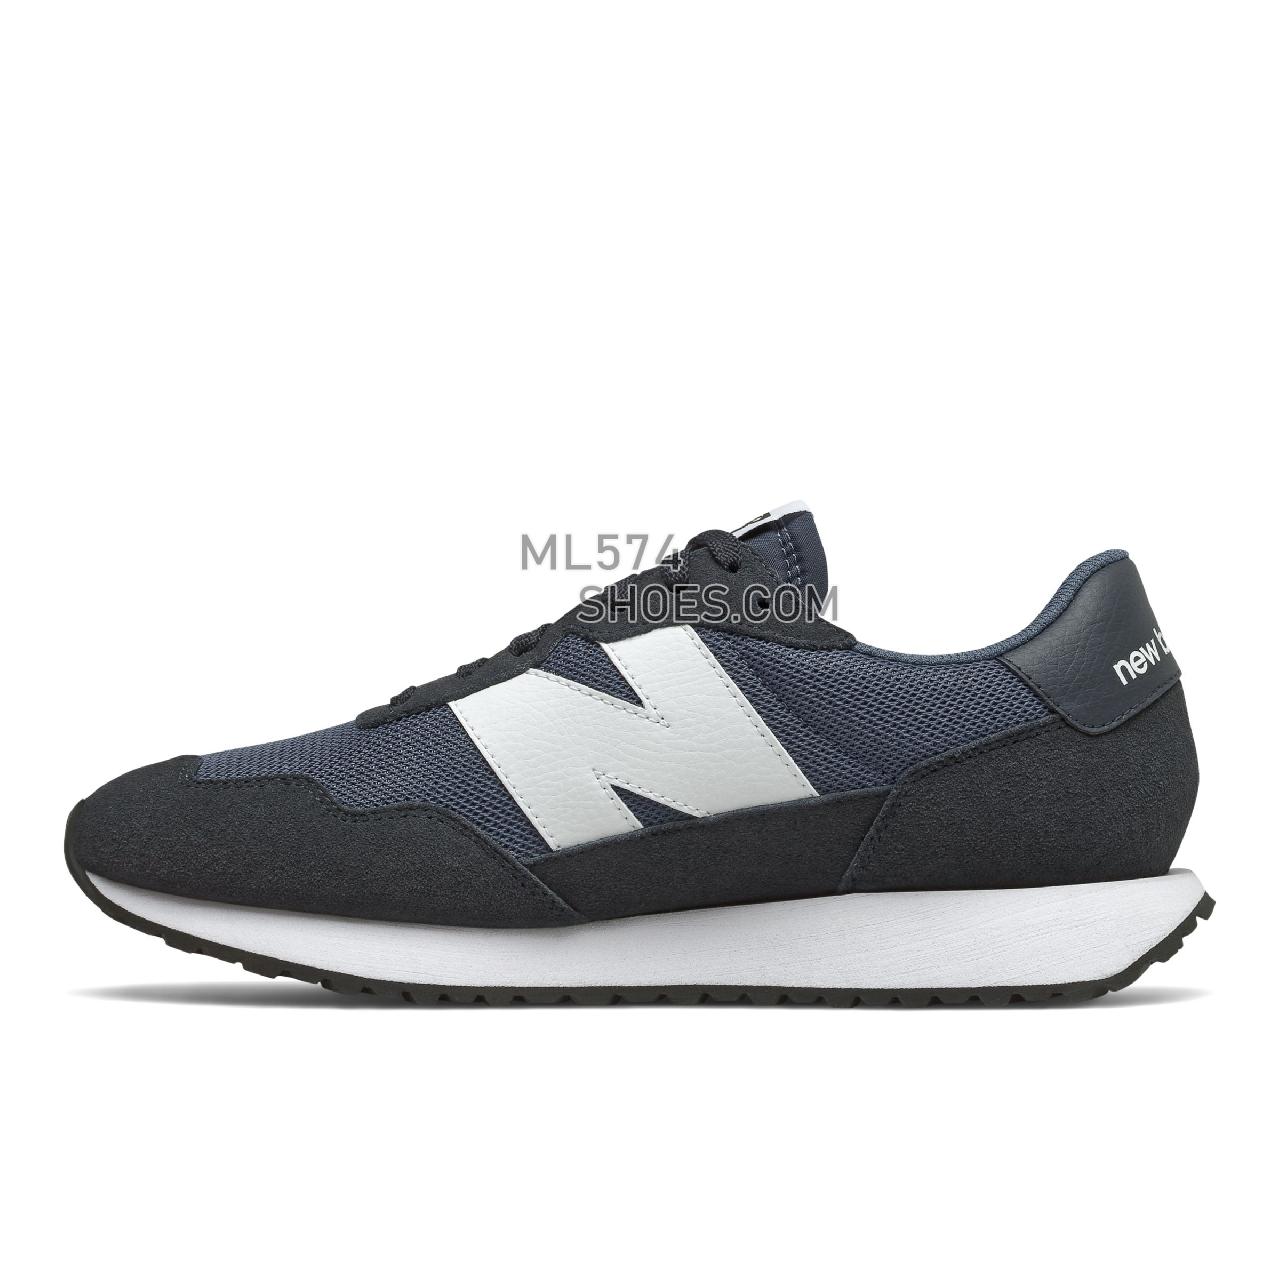 New Balance 237 - Men's Classic Sneakers - Vintage Indigo with Outerspace - MS237CA